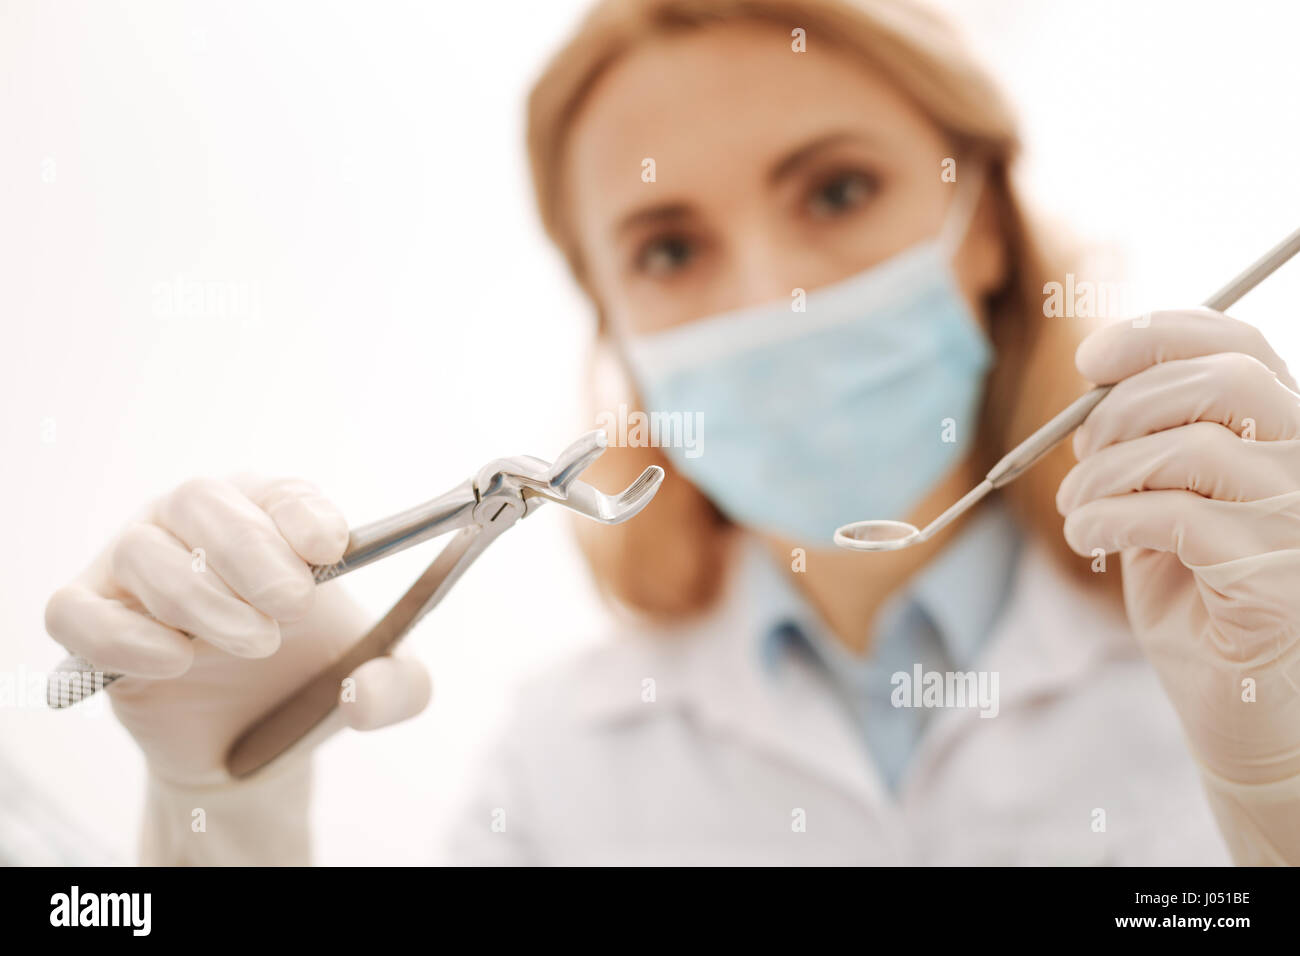 Busy engaged focused specialist holding a set of sterile tools Stock Photo